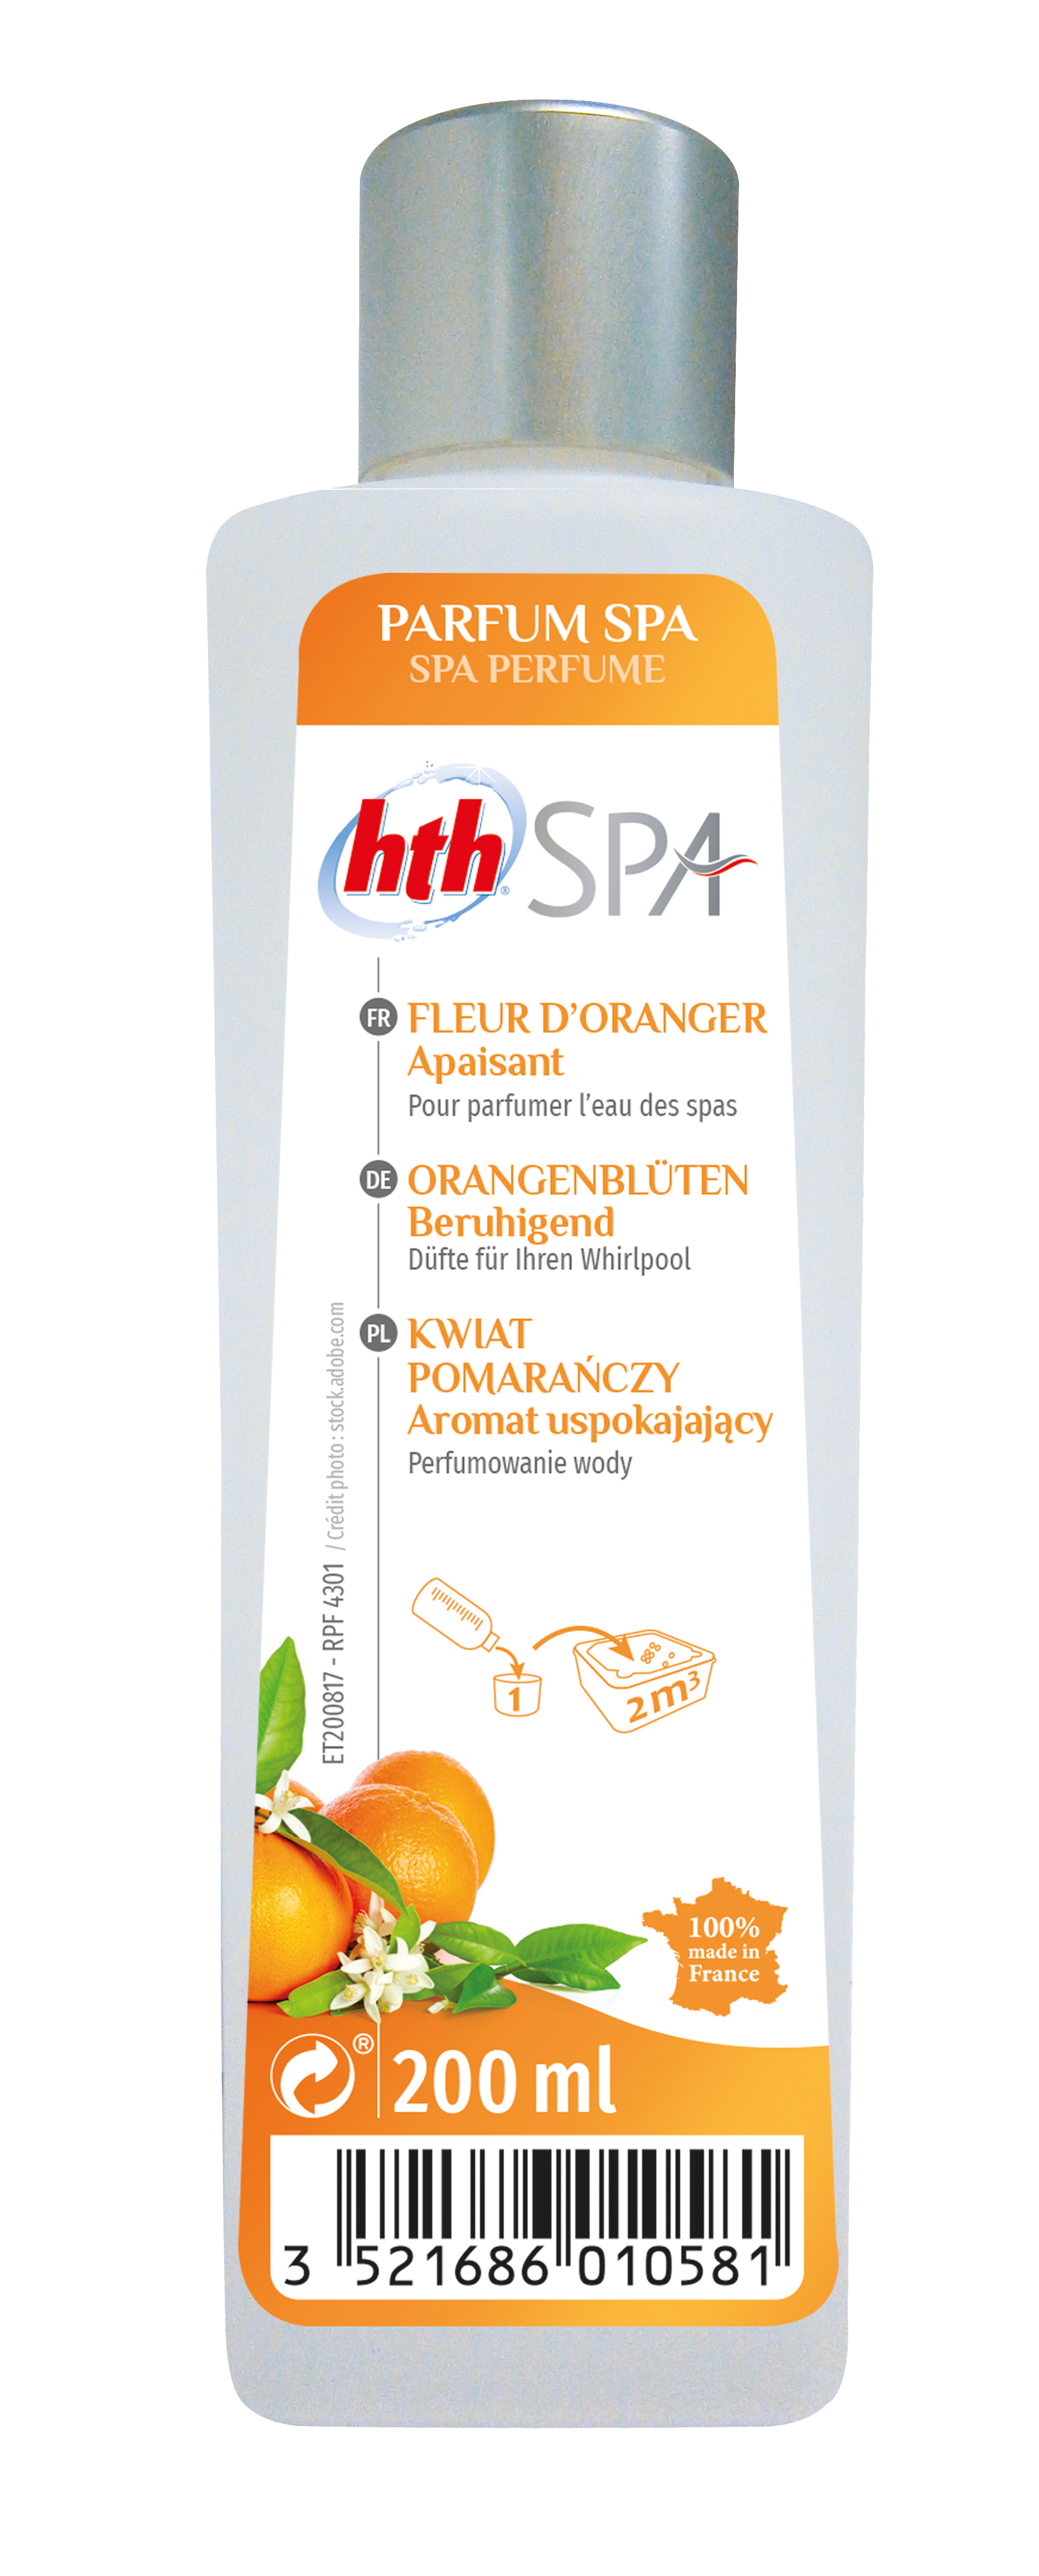 HTH Spa Scent Orange Blossom for your Outdoor-Spa